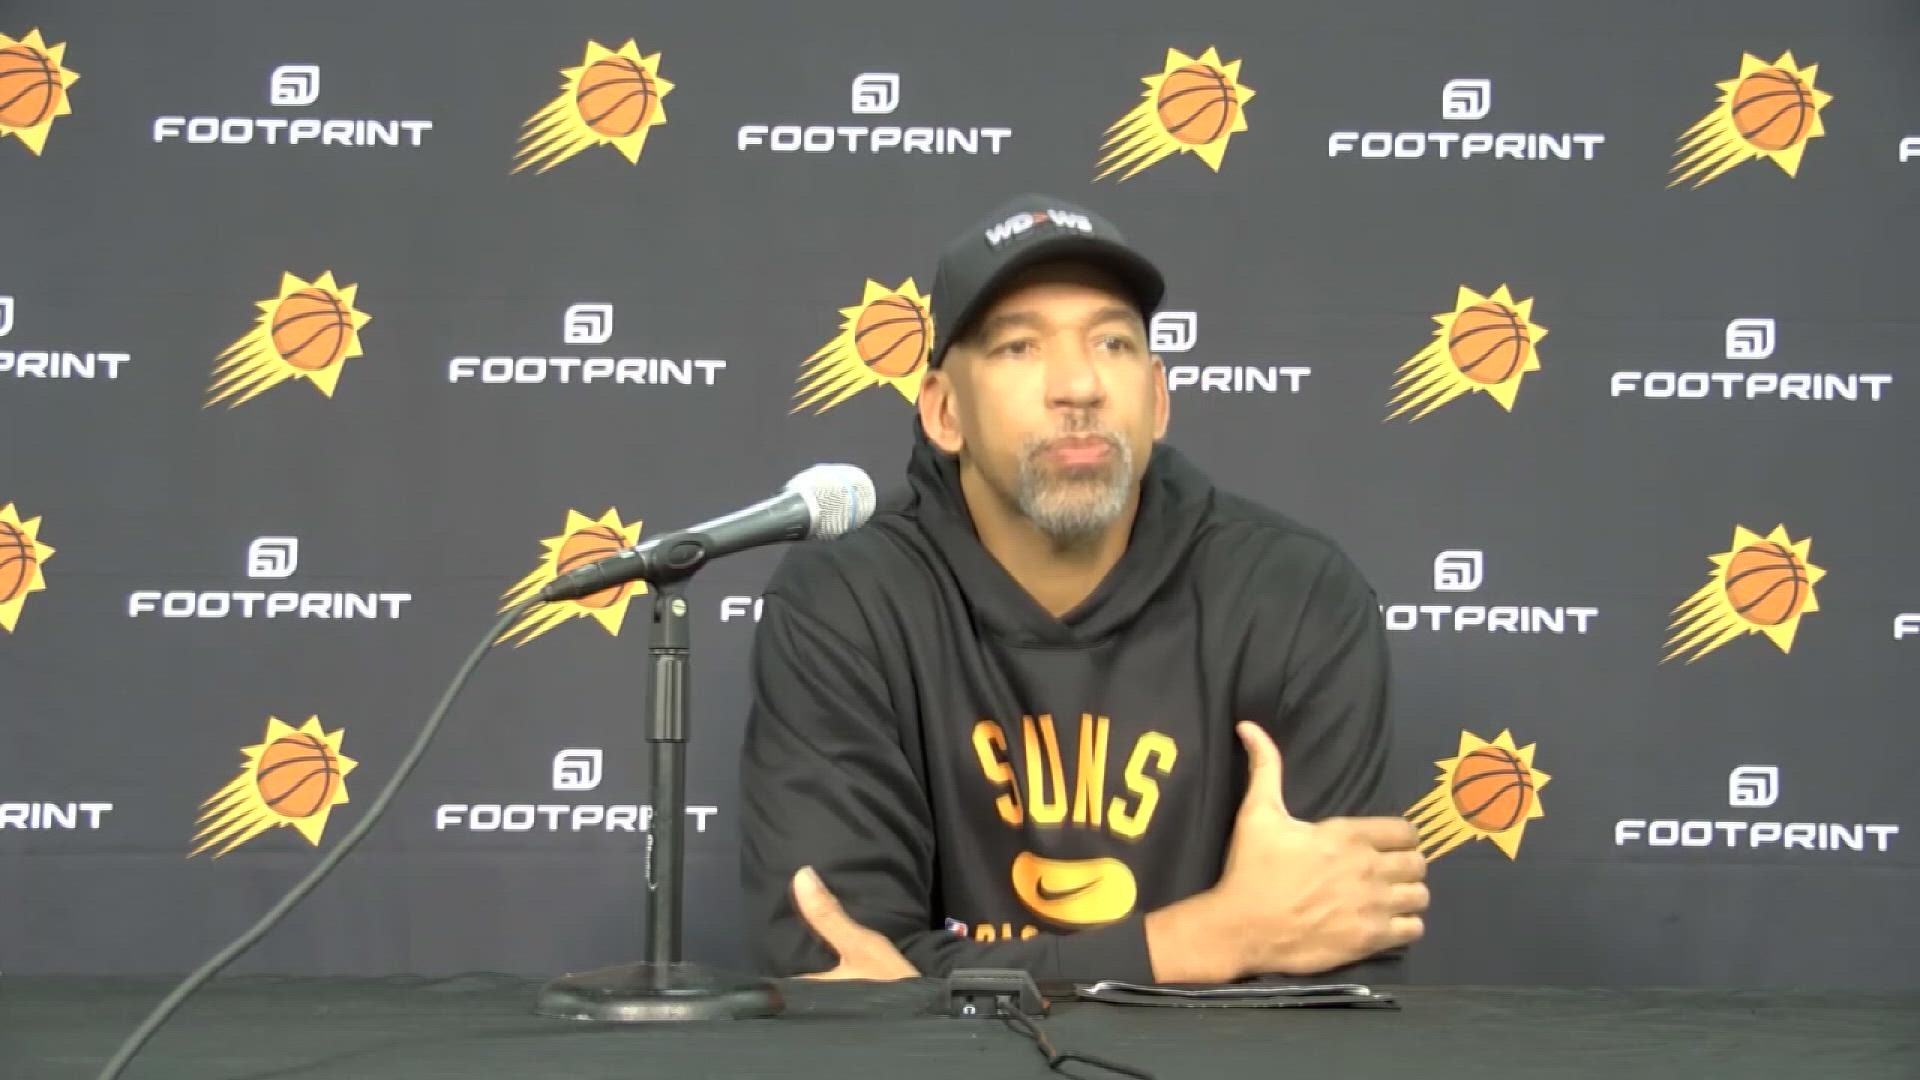 The Suns and Monty Williams partnered together to put a hat with one of his famous sayings up for sale, with the proceeds going to charity.